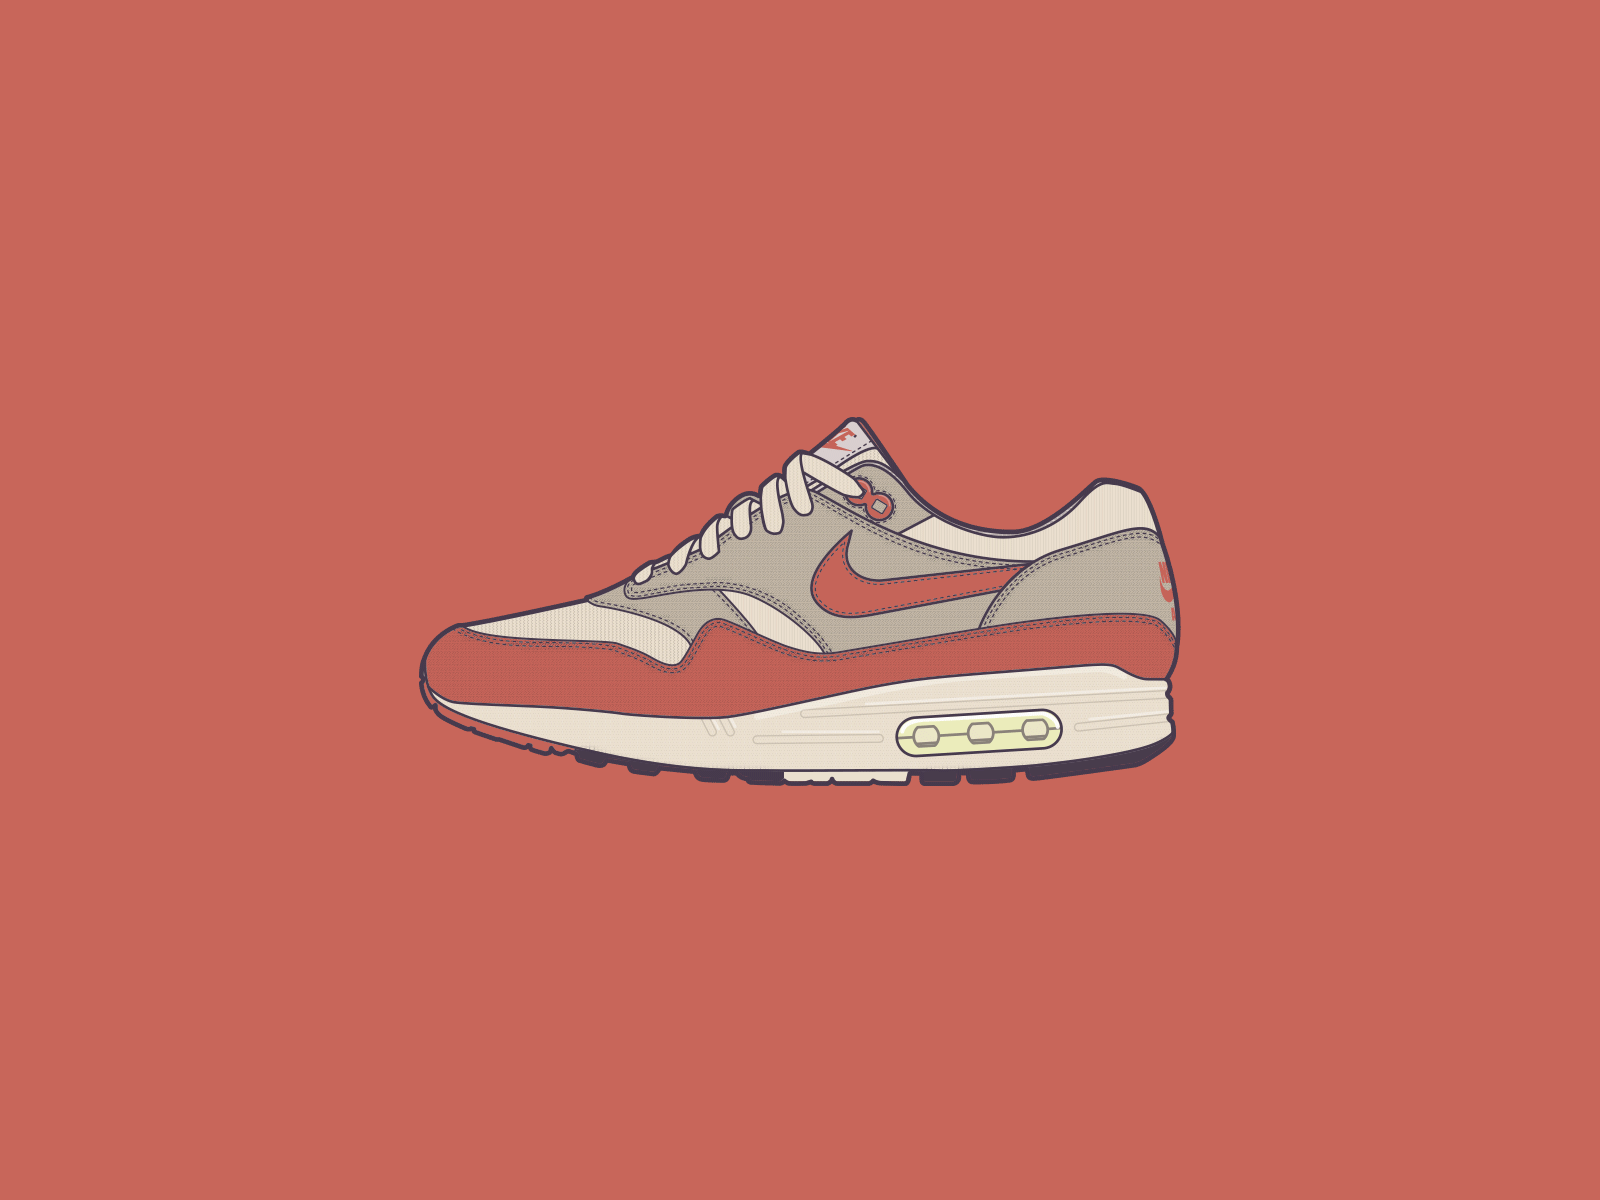 Airmax by Christia Fung on Dribbble